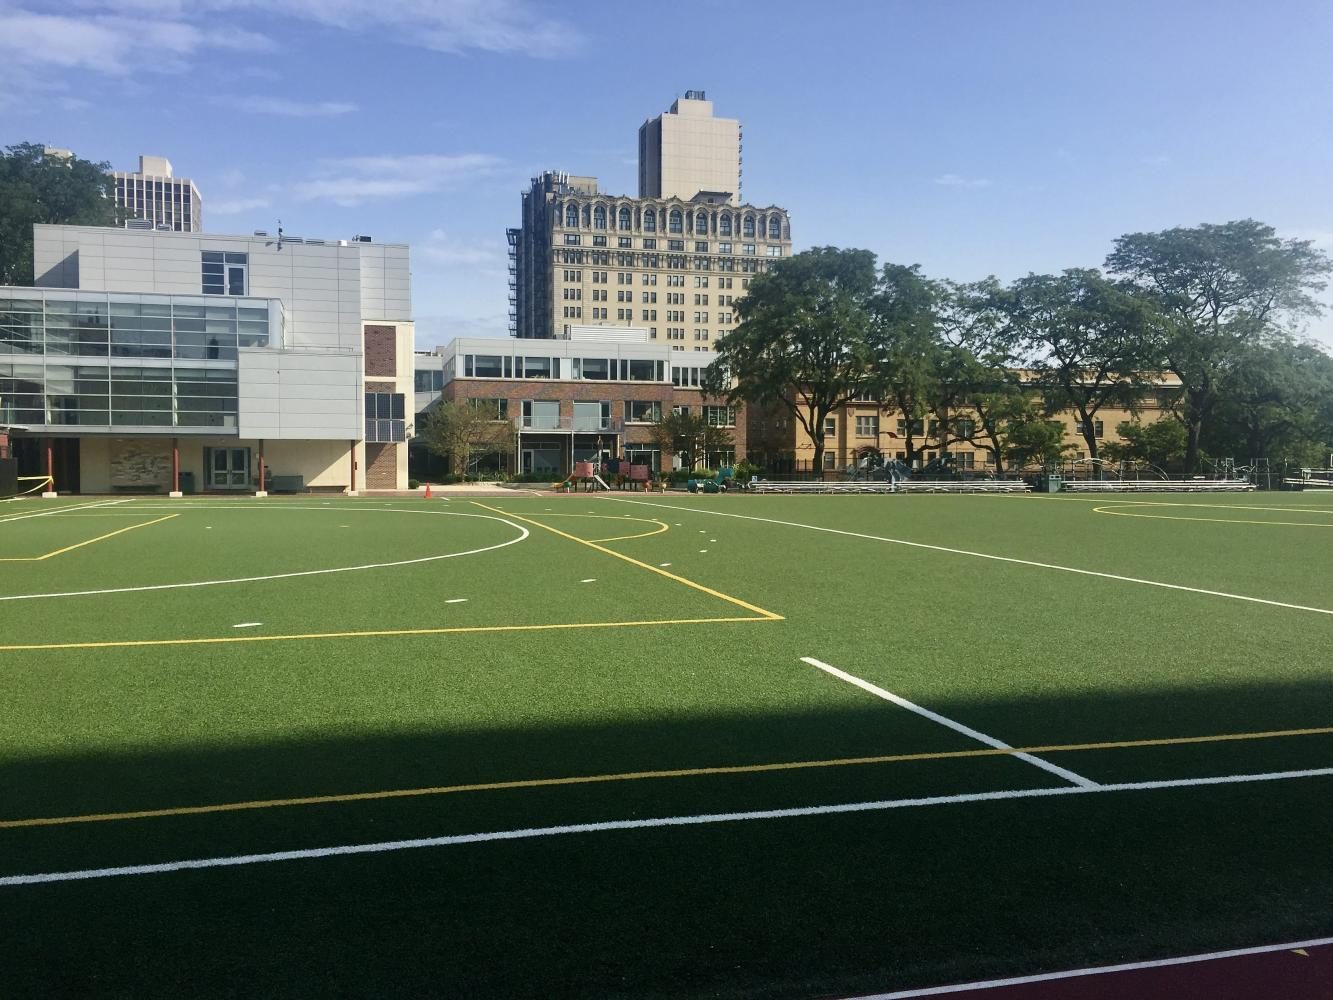 The Parker turf field, installed in 2012, is home to Colonel athletics.